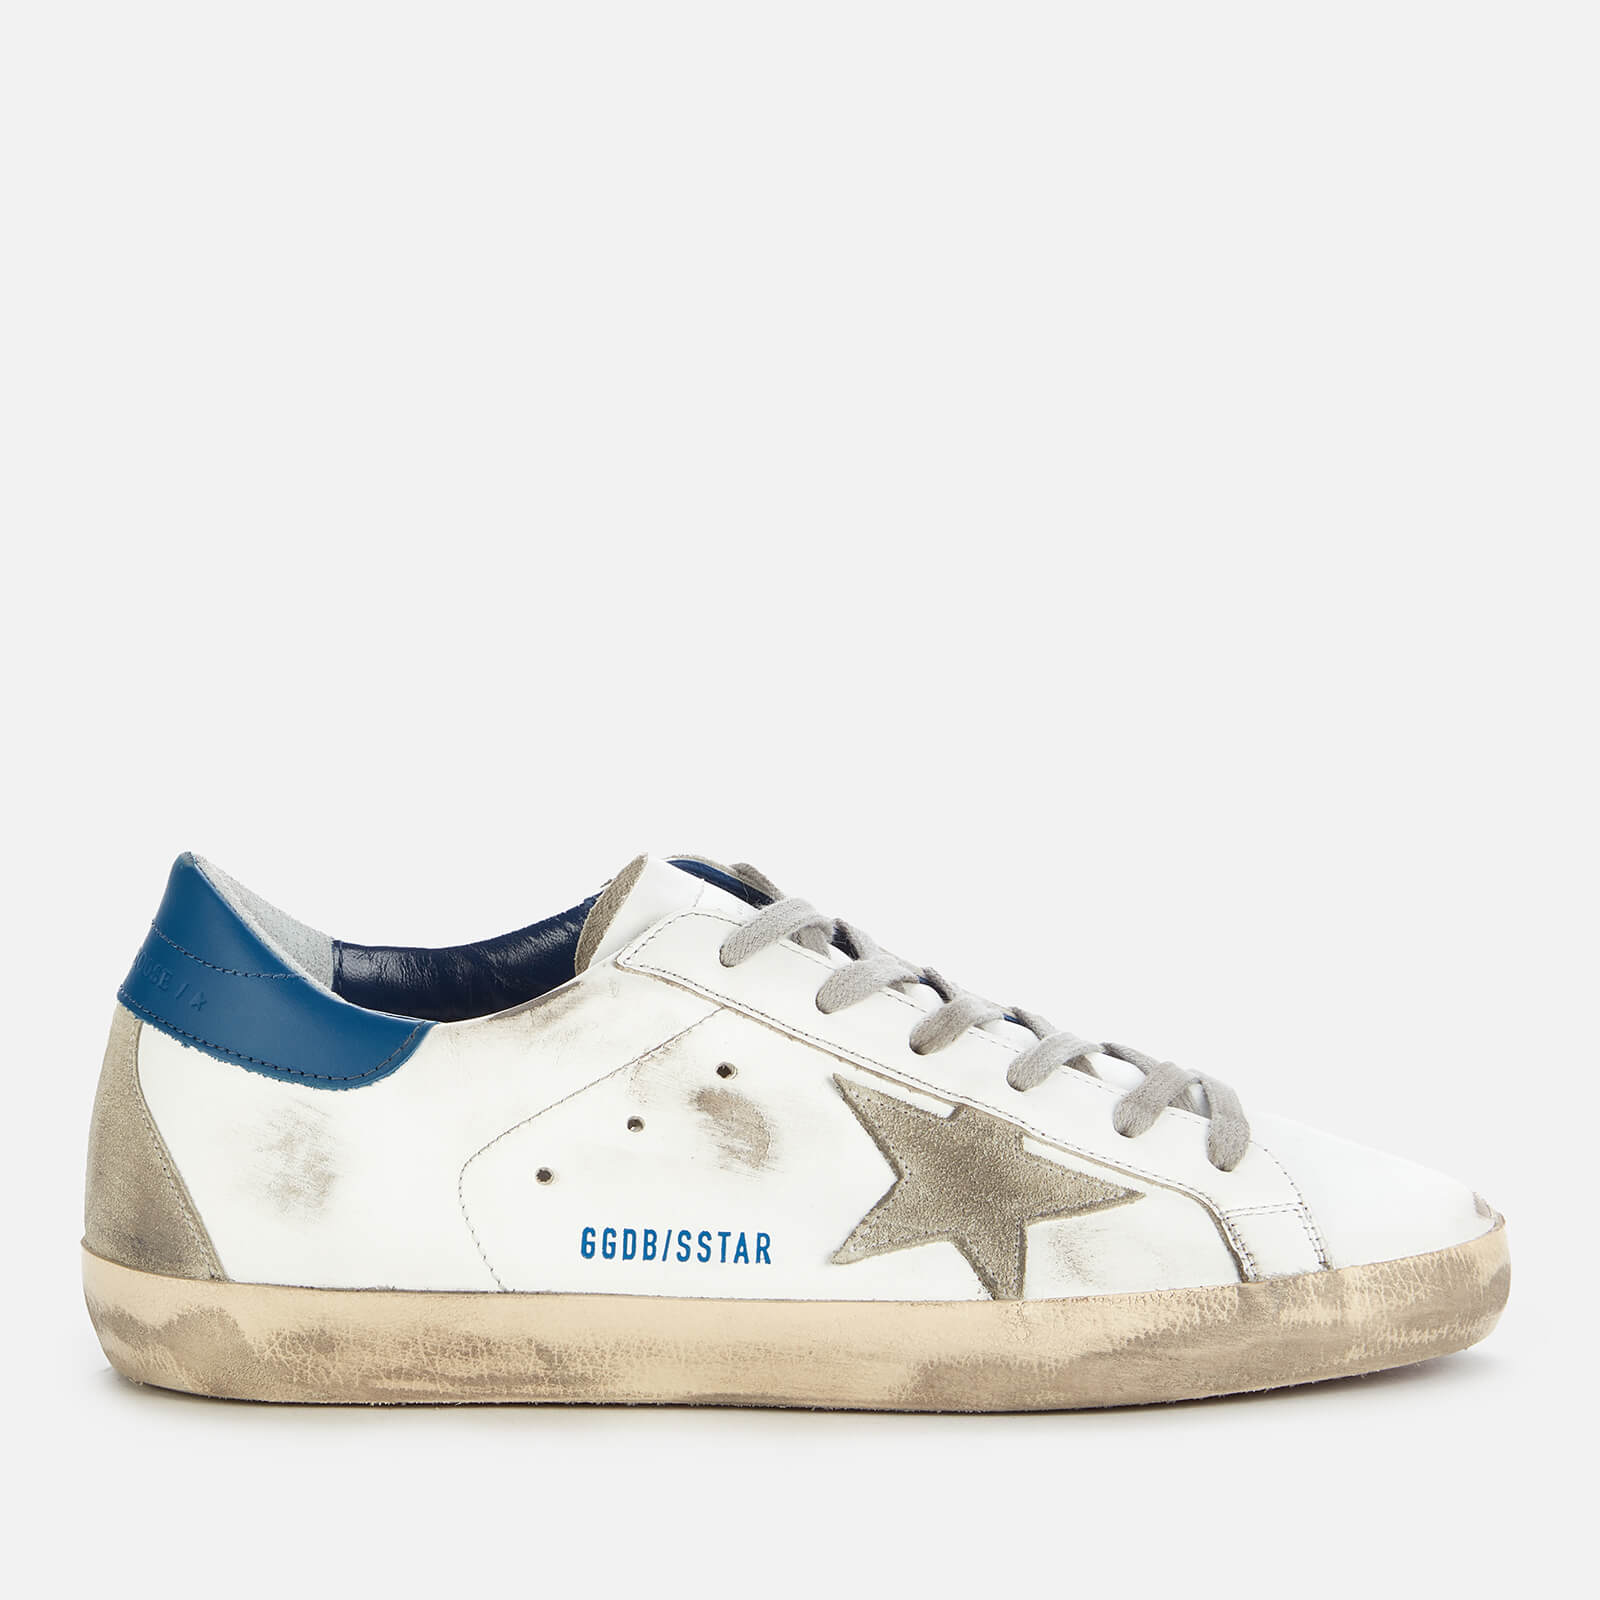 Golden Goose Deluxe Brand Women's Superstar Leather Trainers - White/Ice/Blue - UK 8